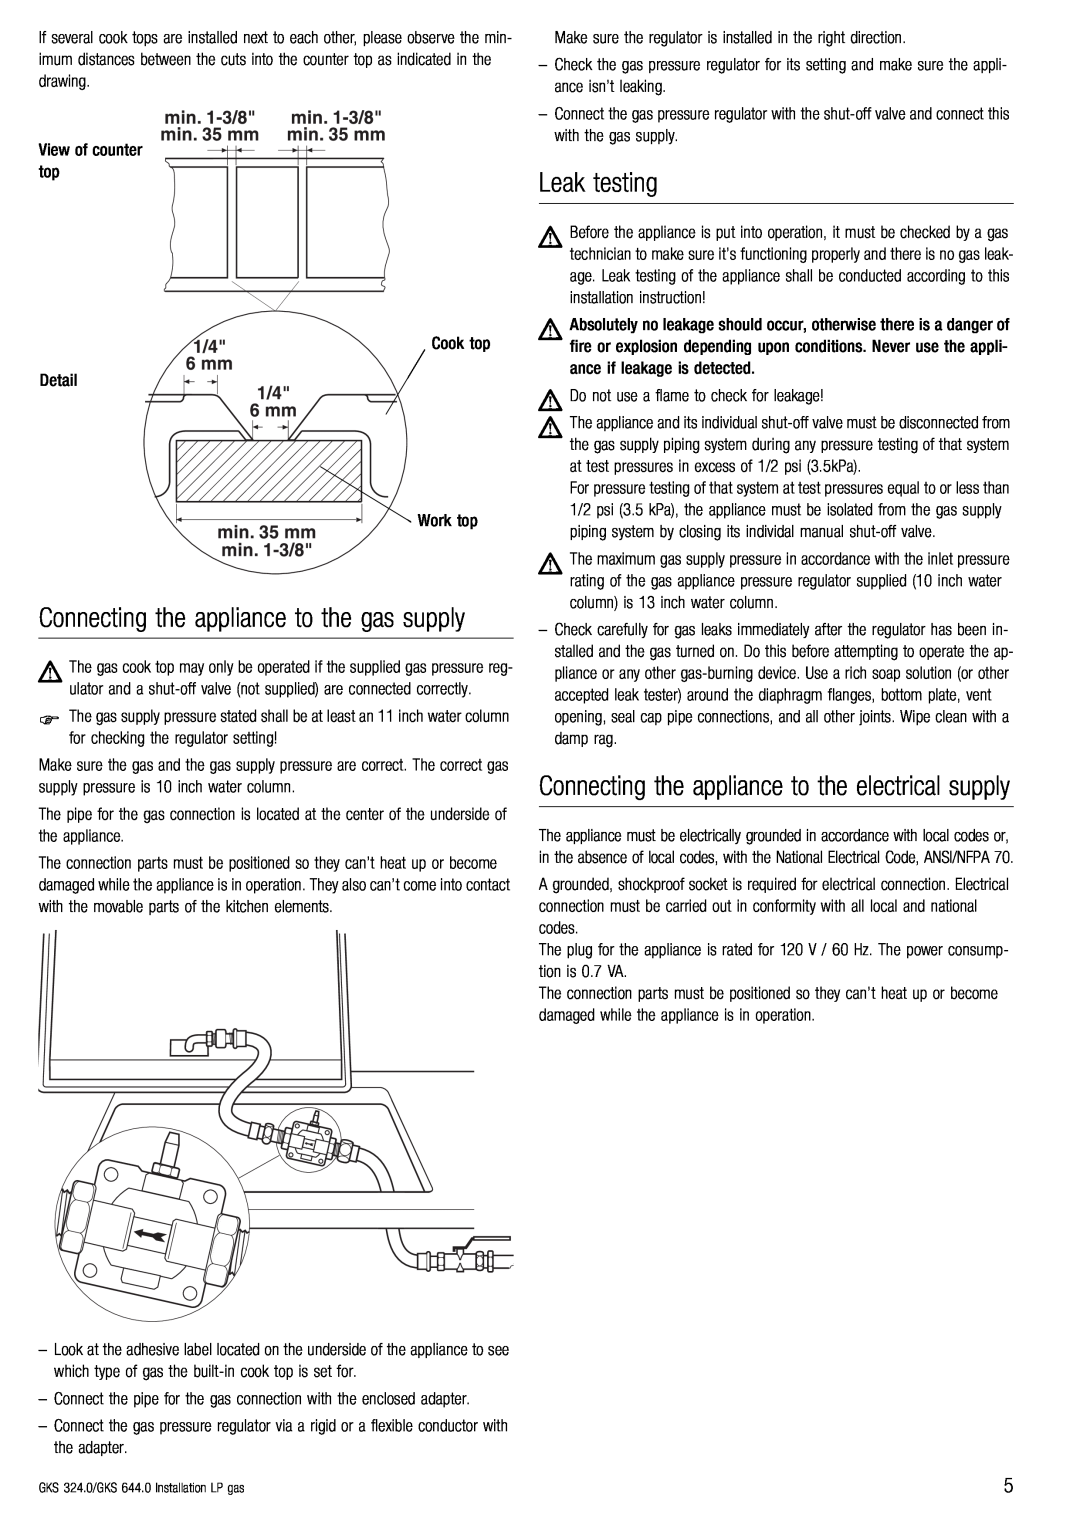 Kuppersbusch USA GKS 324.0, GKS 644.0 installation instructions Leak testing, Connecting the appliance to the gas supply 